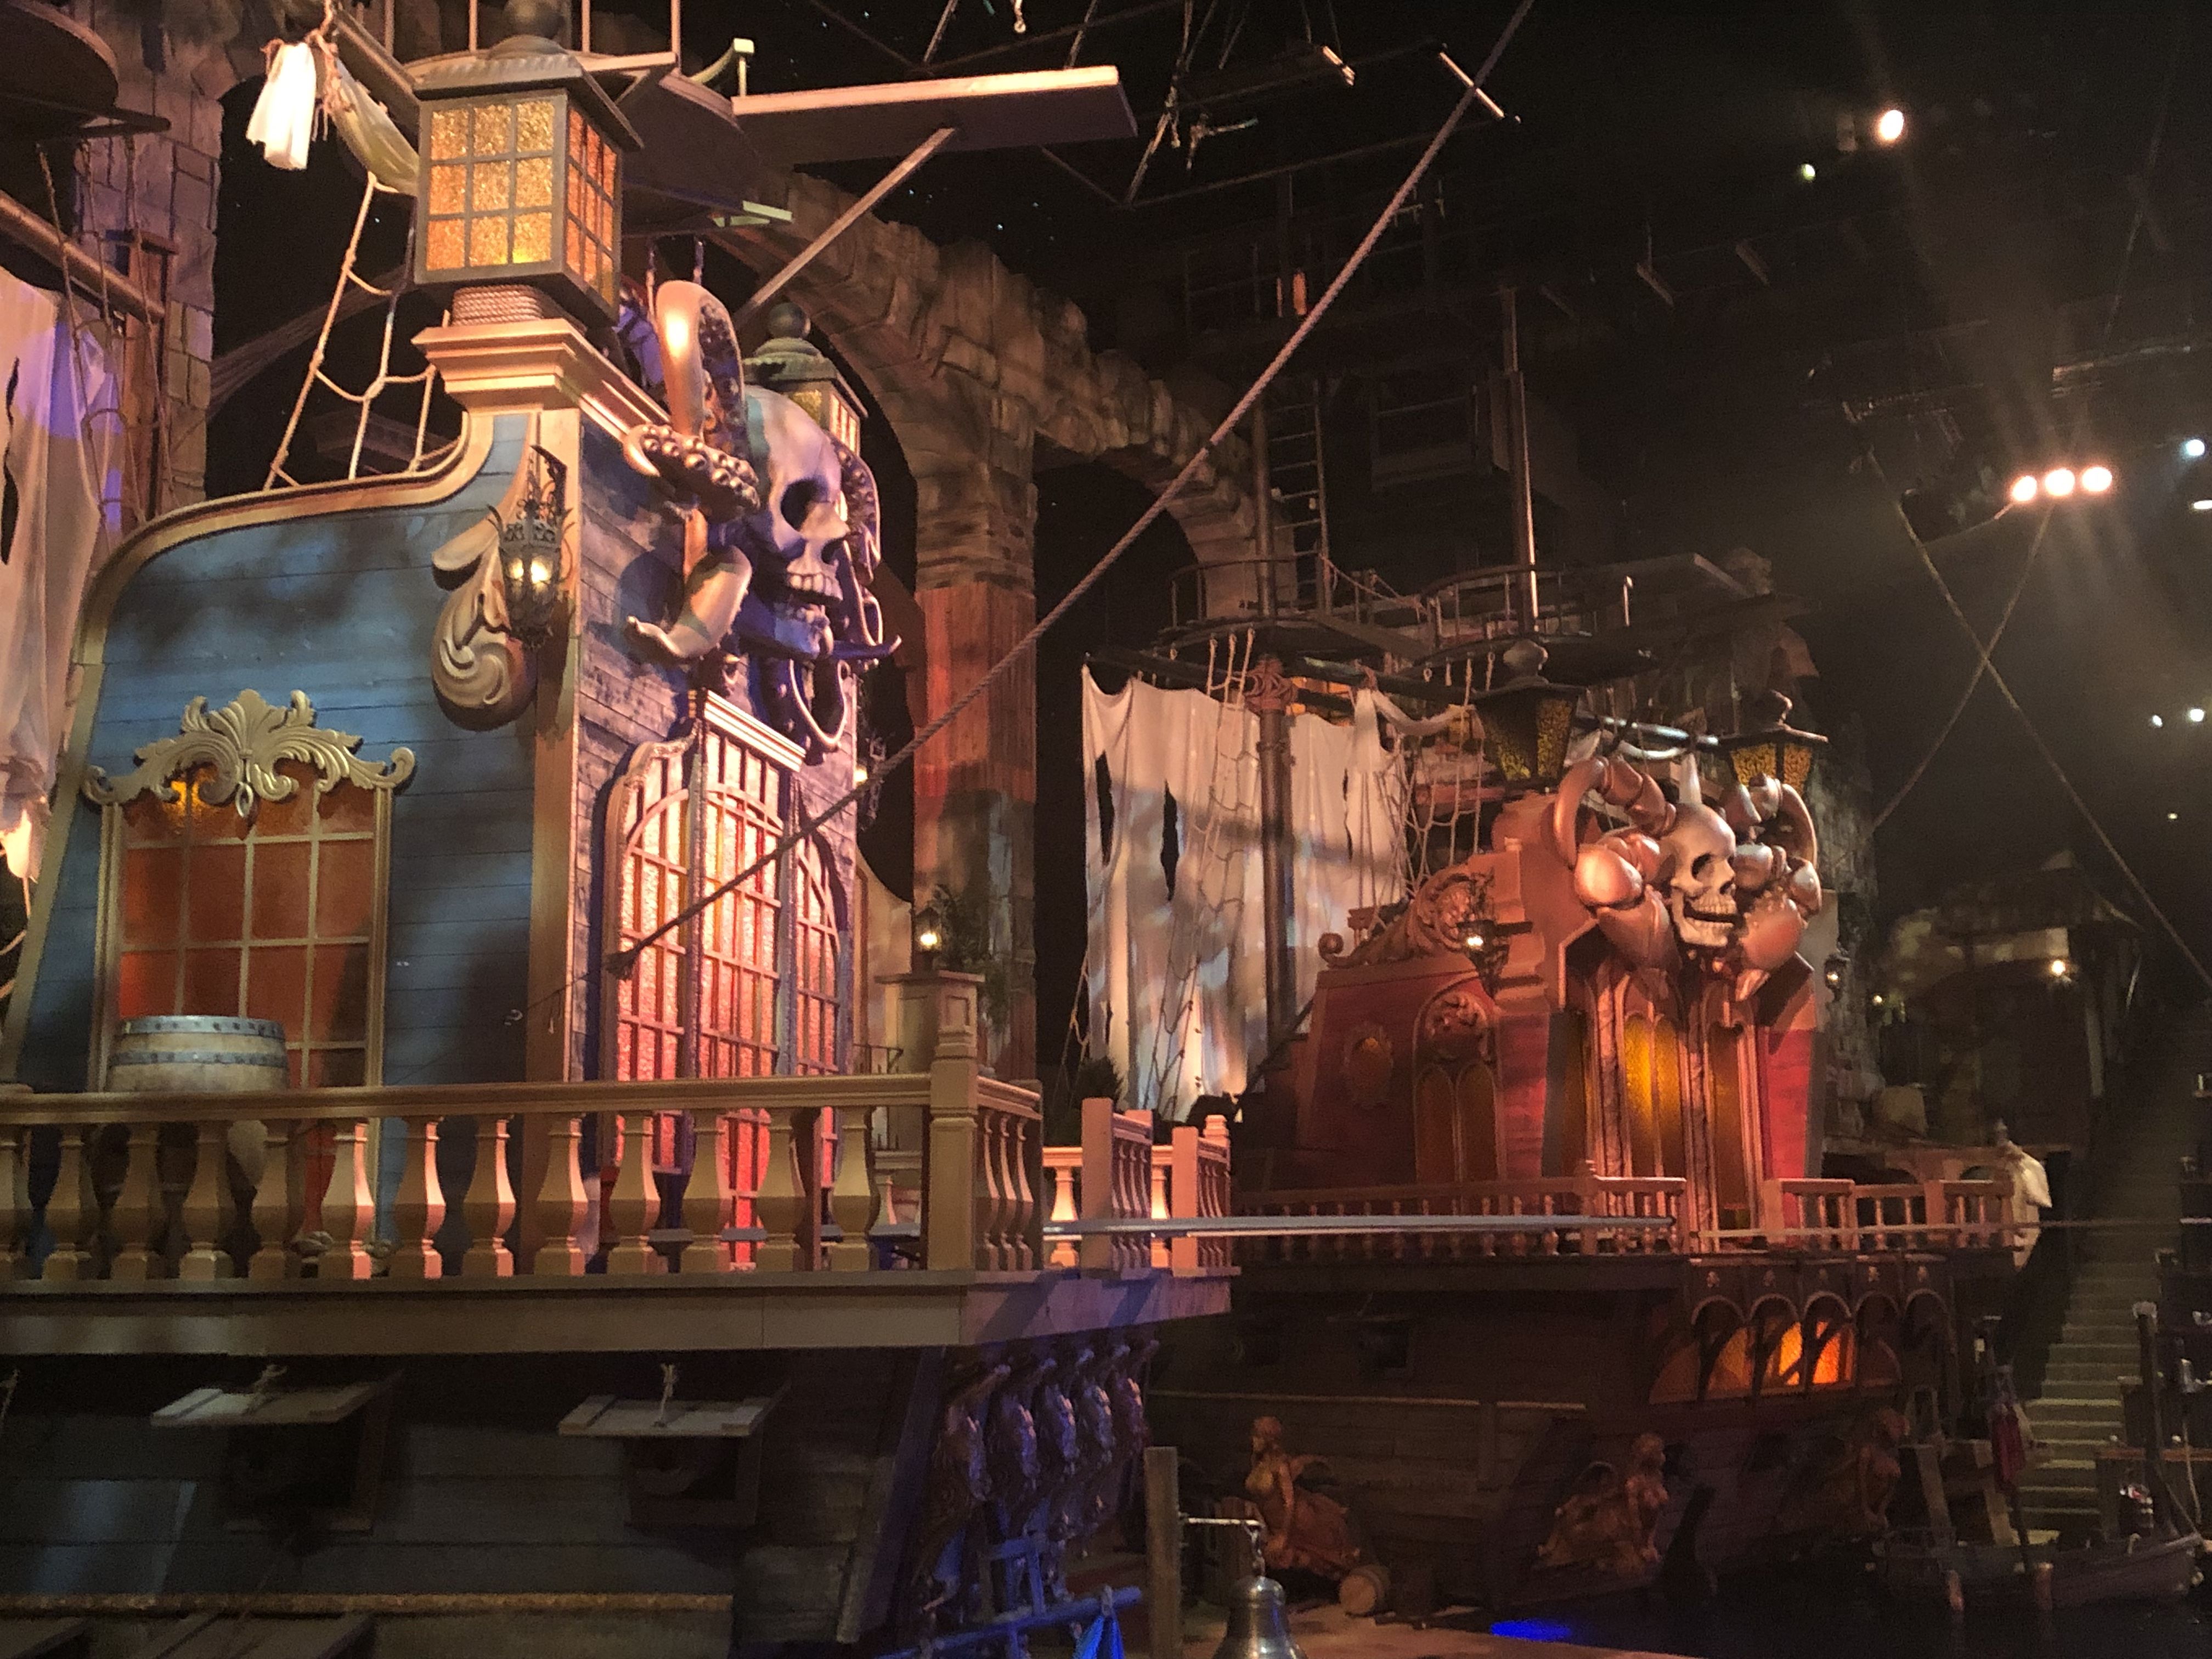 the pirate voyage dinner show